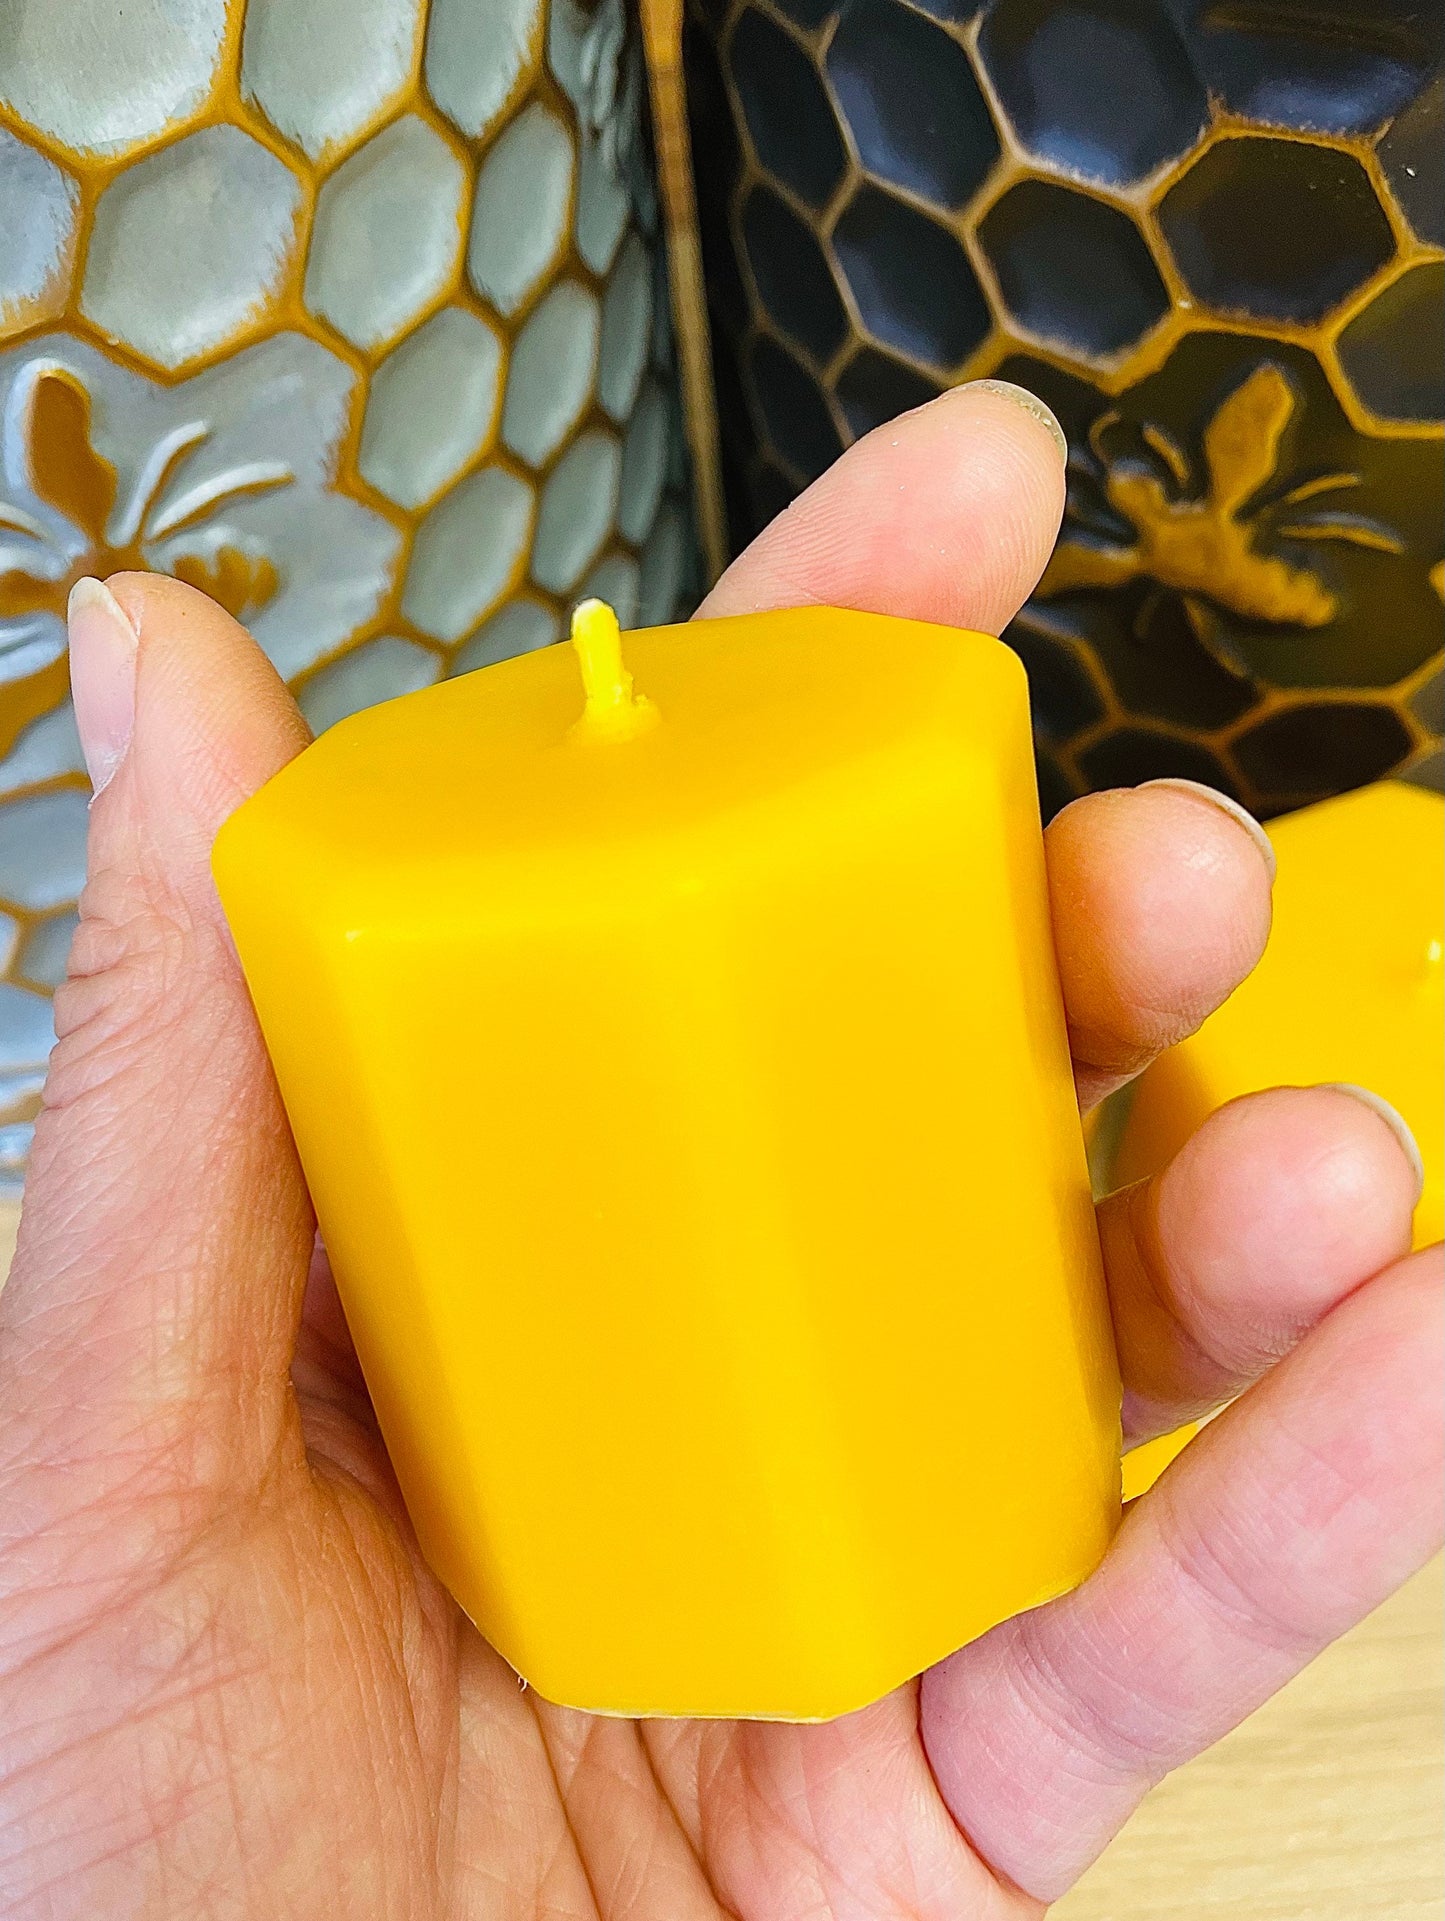 6 Pure beeswax votive candles - octagonal votive candles - wedding candles - baby shower gift - natural beeswax candles